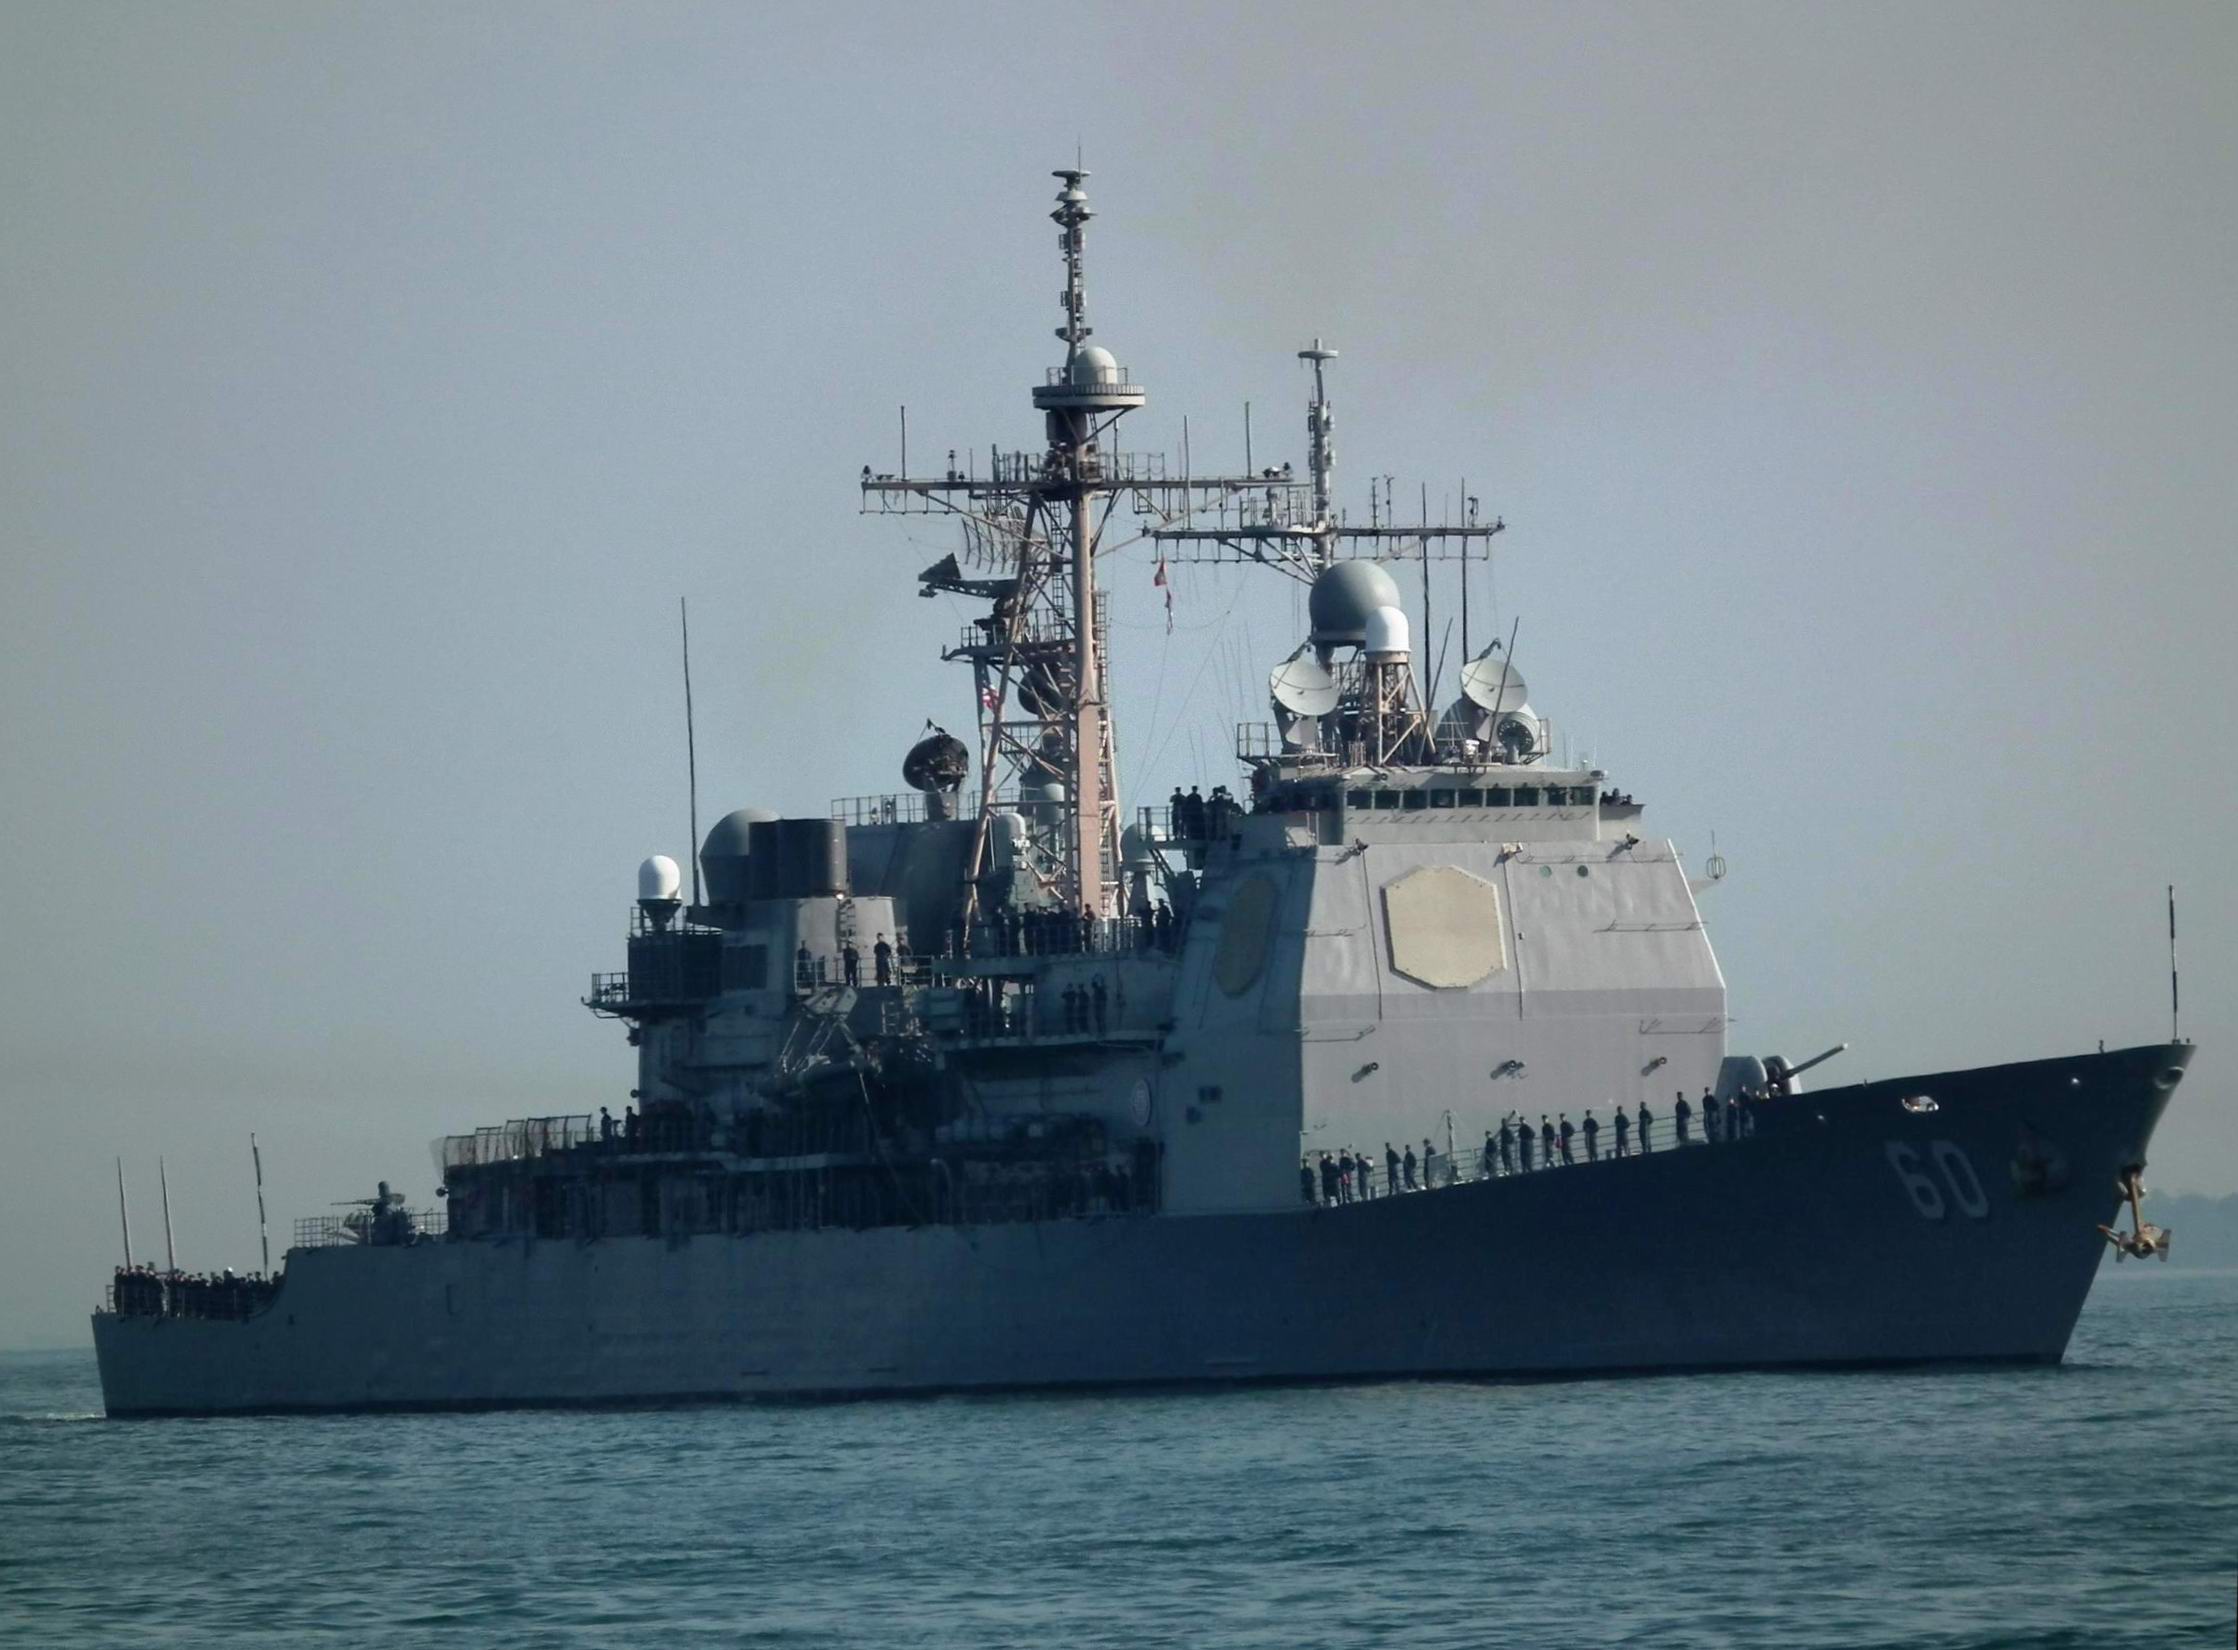 USS Normandy Portsmouth May 27 2012 - 4.jpg